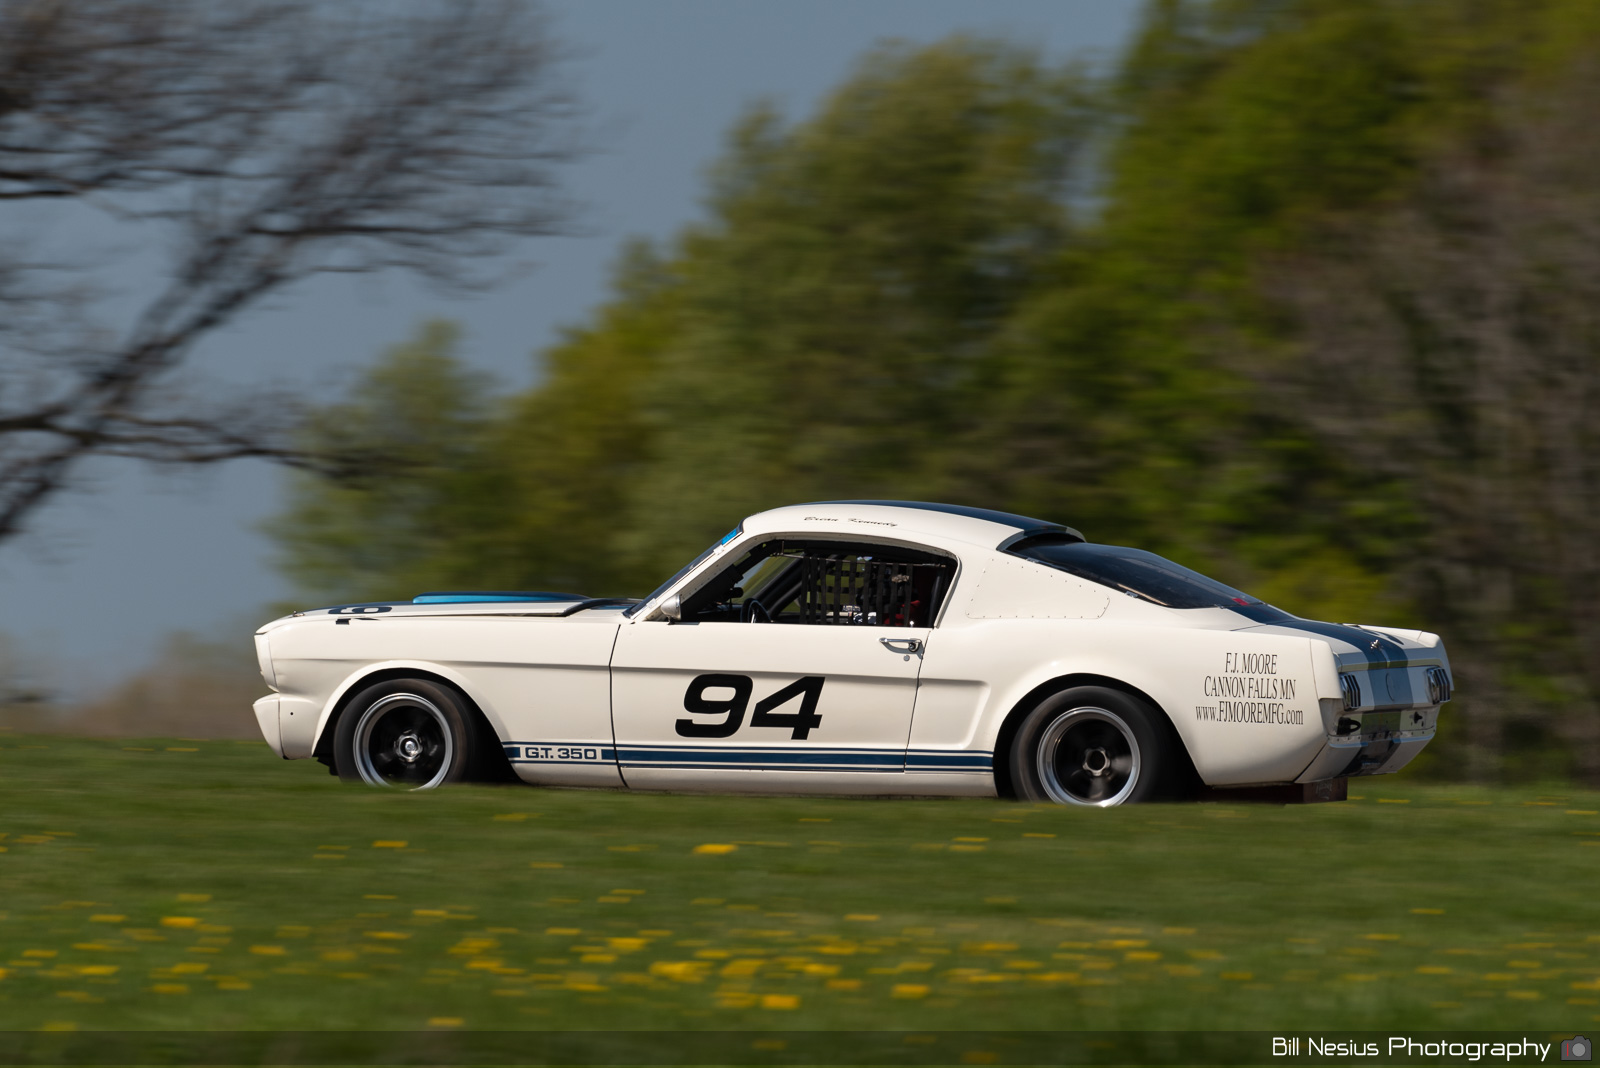 1966 Ford Mustang Shelby GT350 Number 94 / DSC_8068 / 3